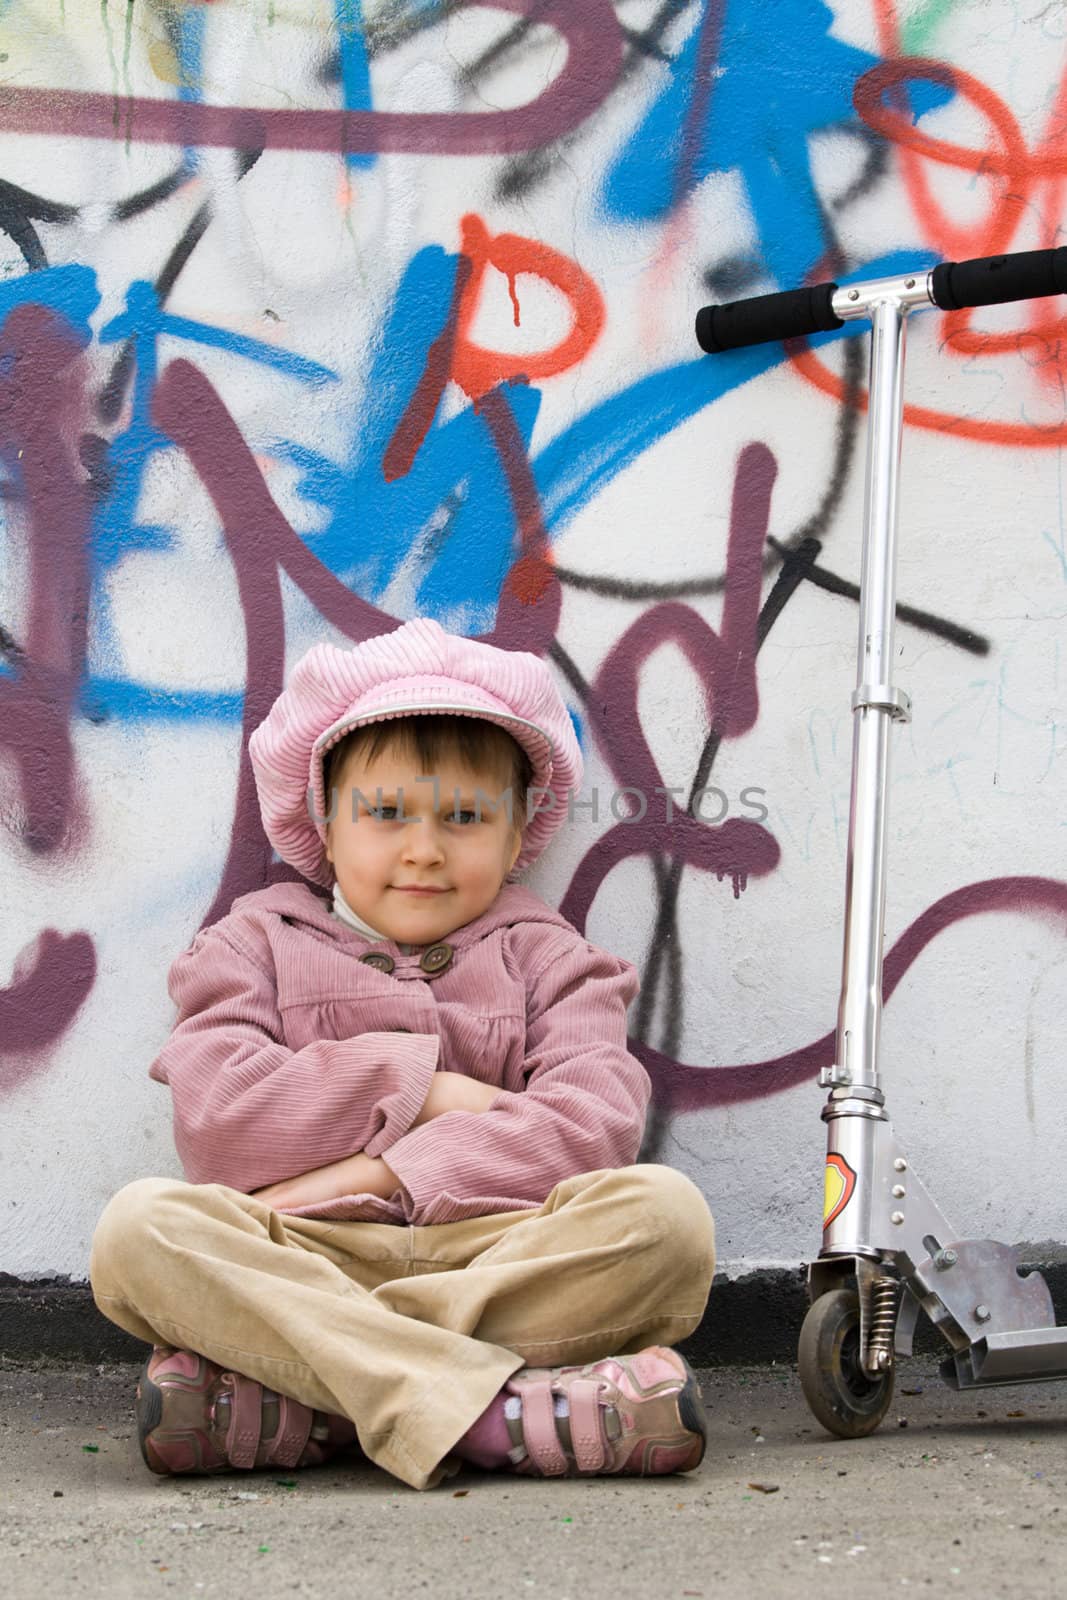 Funny little girl with scooter is sitting on the ground near graffiti painted wall